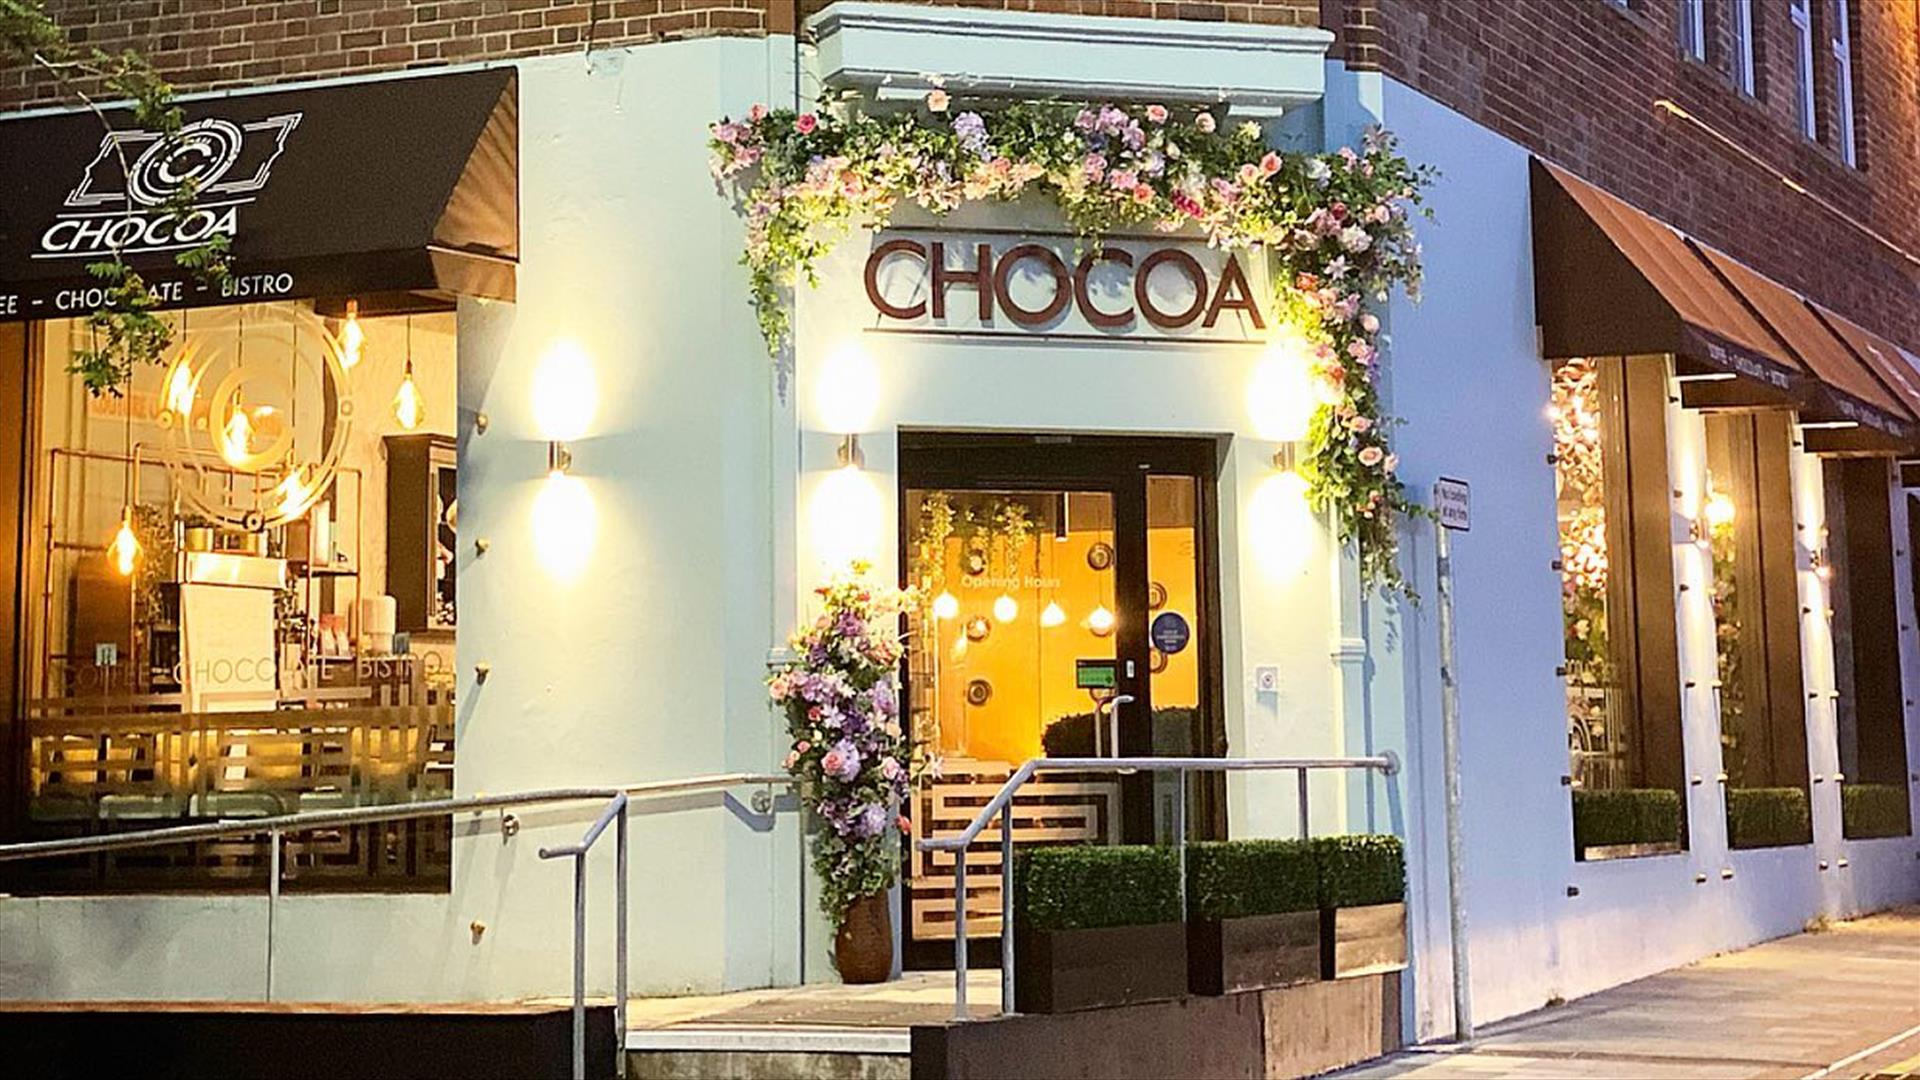 Chocoa Couture Chocolate House and Bistro